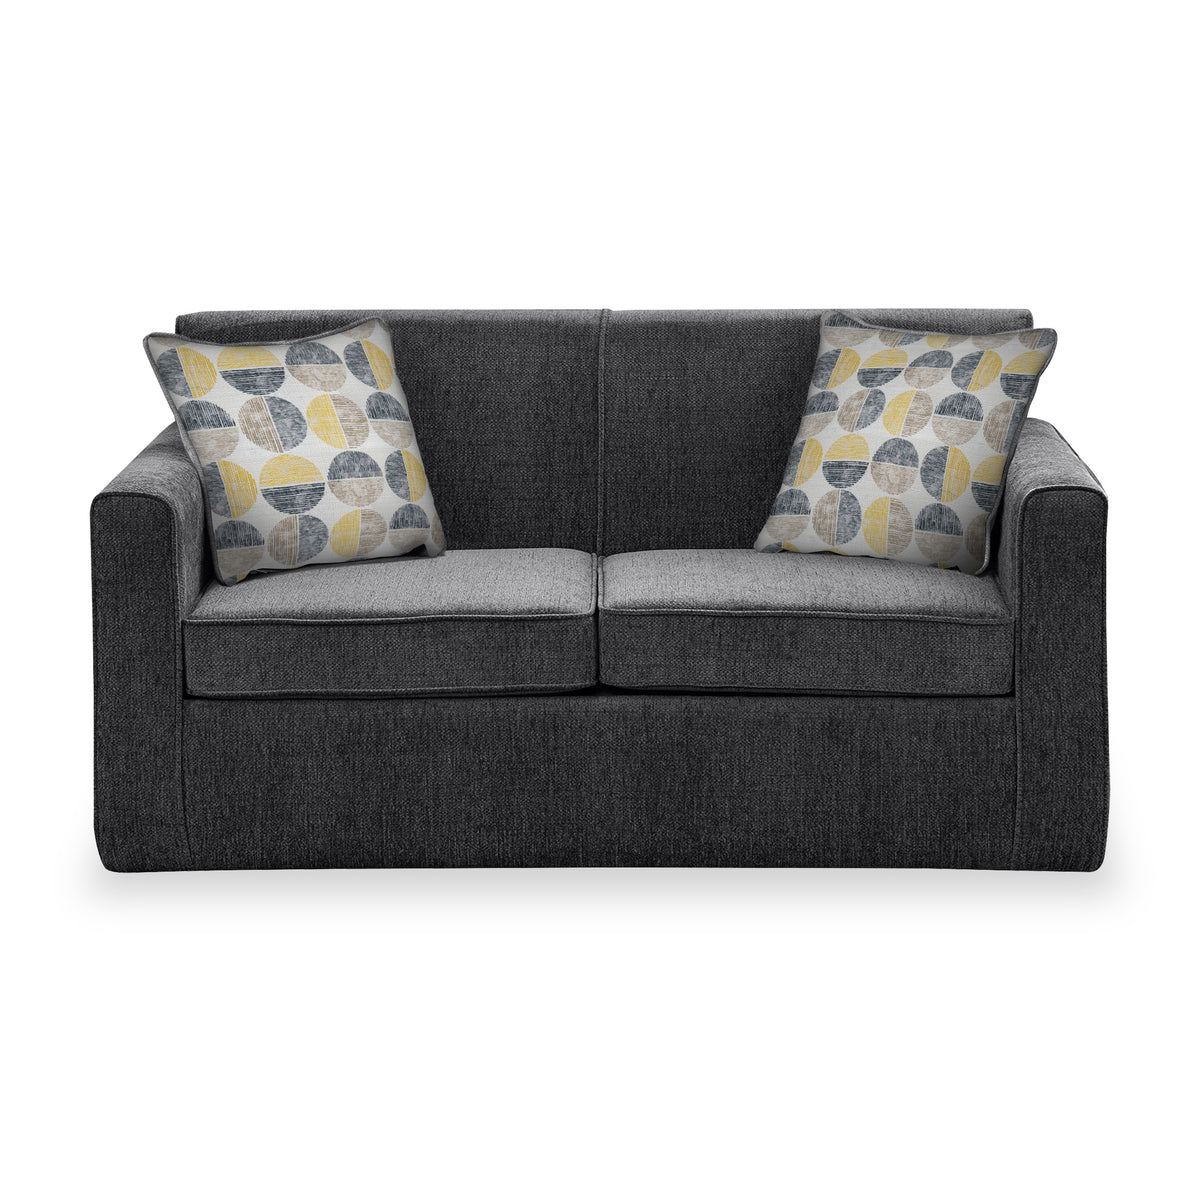 Bawtry Charcoal Faux Linen 2 Seater Sofabed with Beige Scatter Cushions from Roseland Furniture